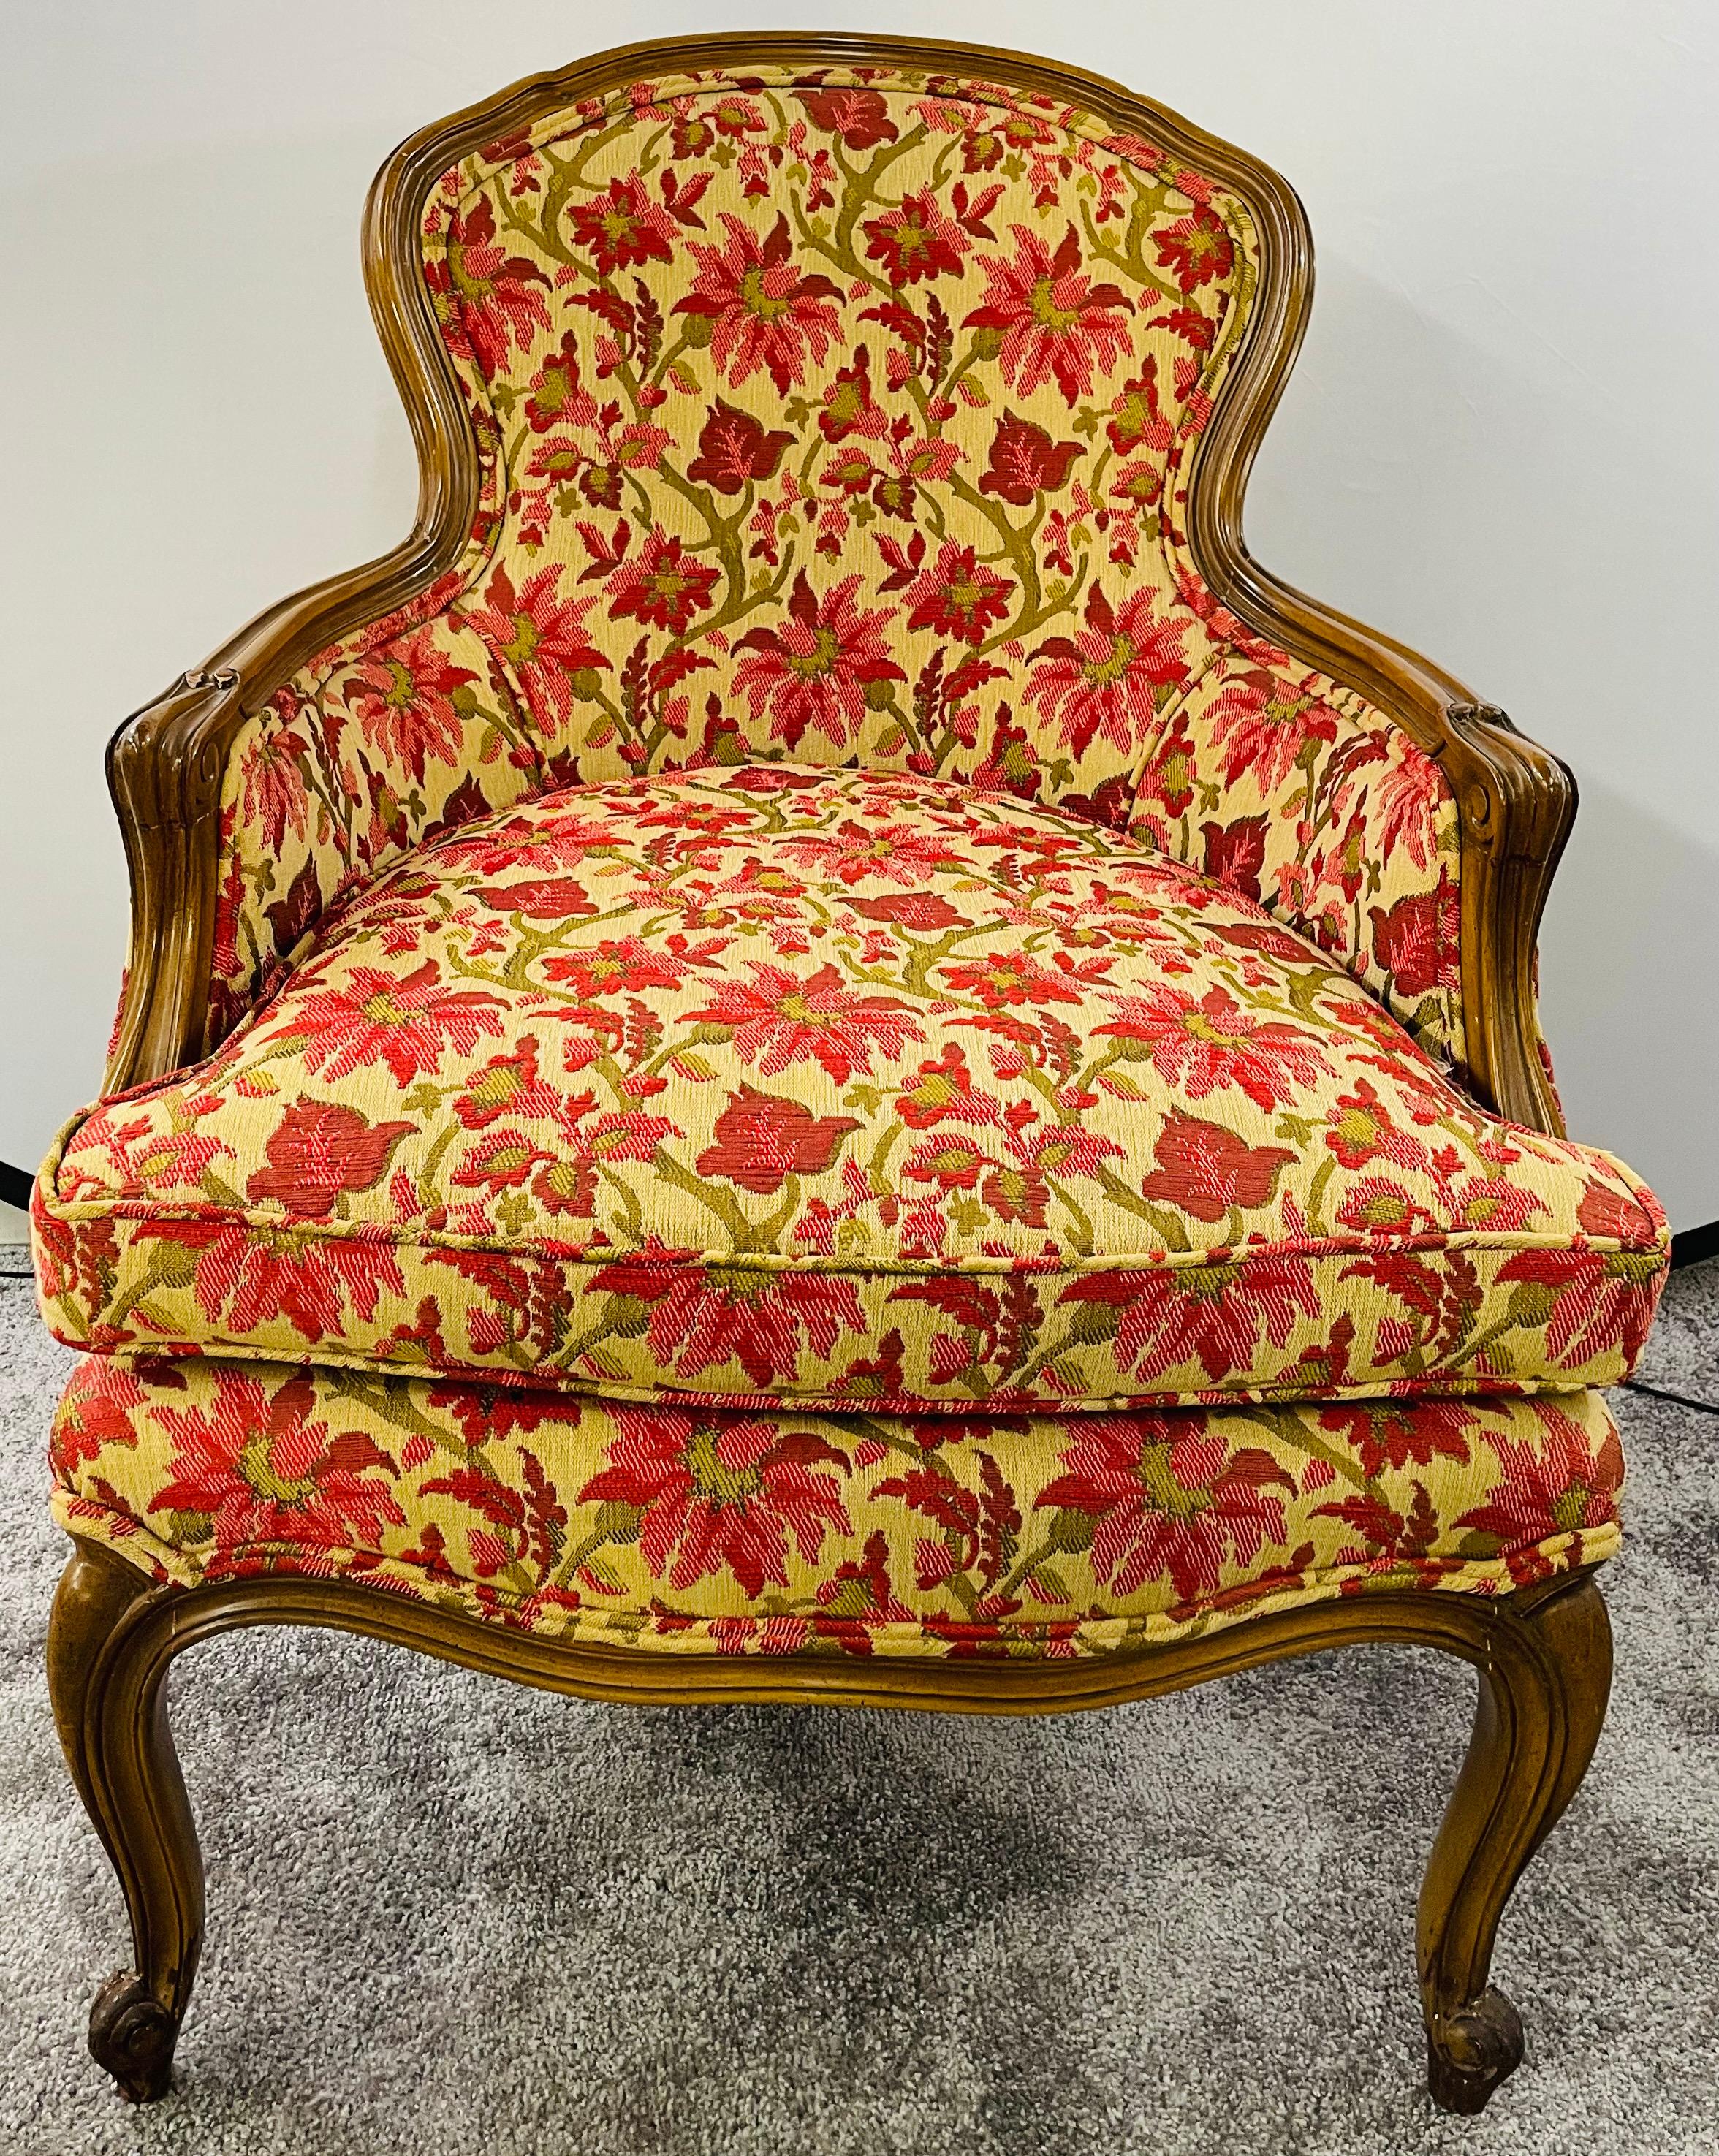 19th Century French Louis XV Bergere Arm Chair in a Fine Floral Upholstery In Good Condition For Sale In Plainview, NY